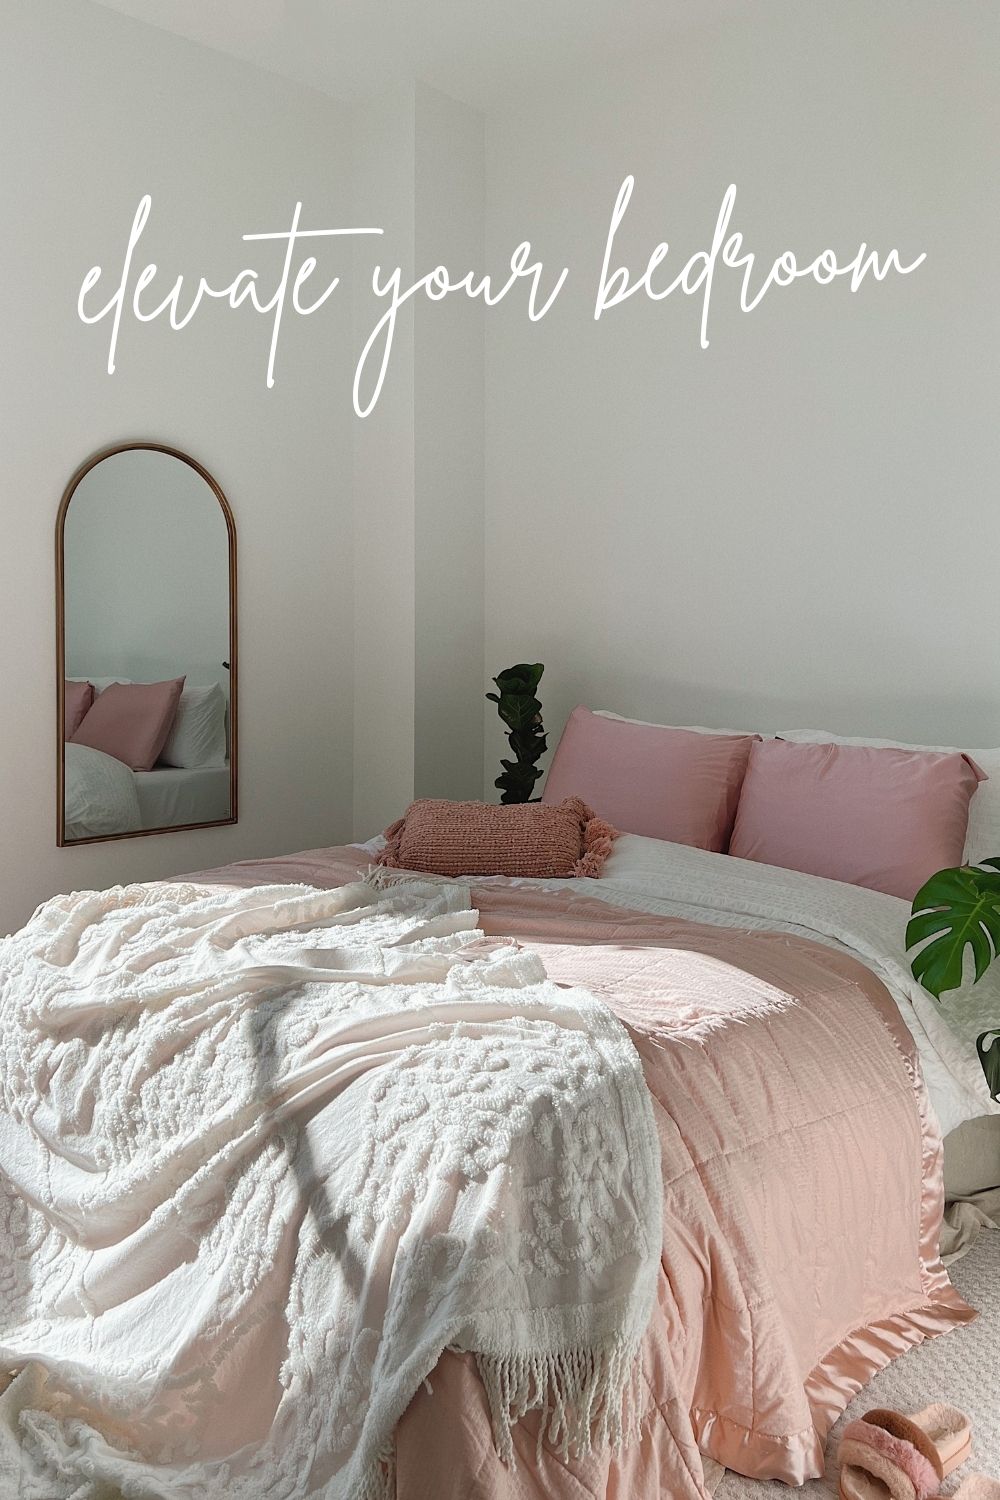 How to elevate your bedroom for under $50